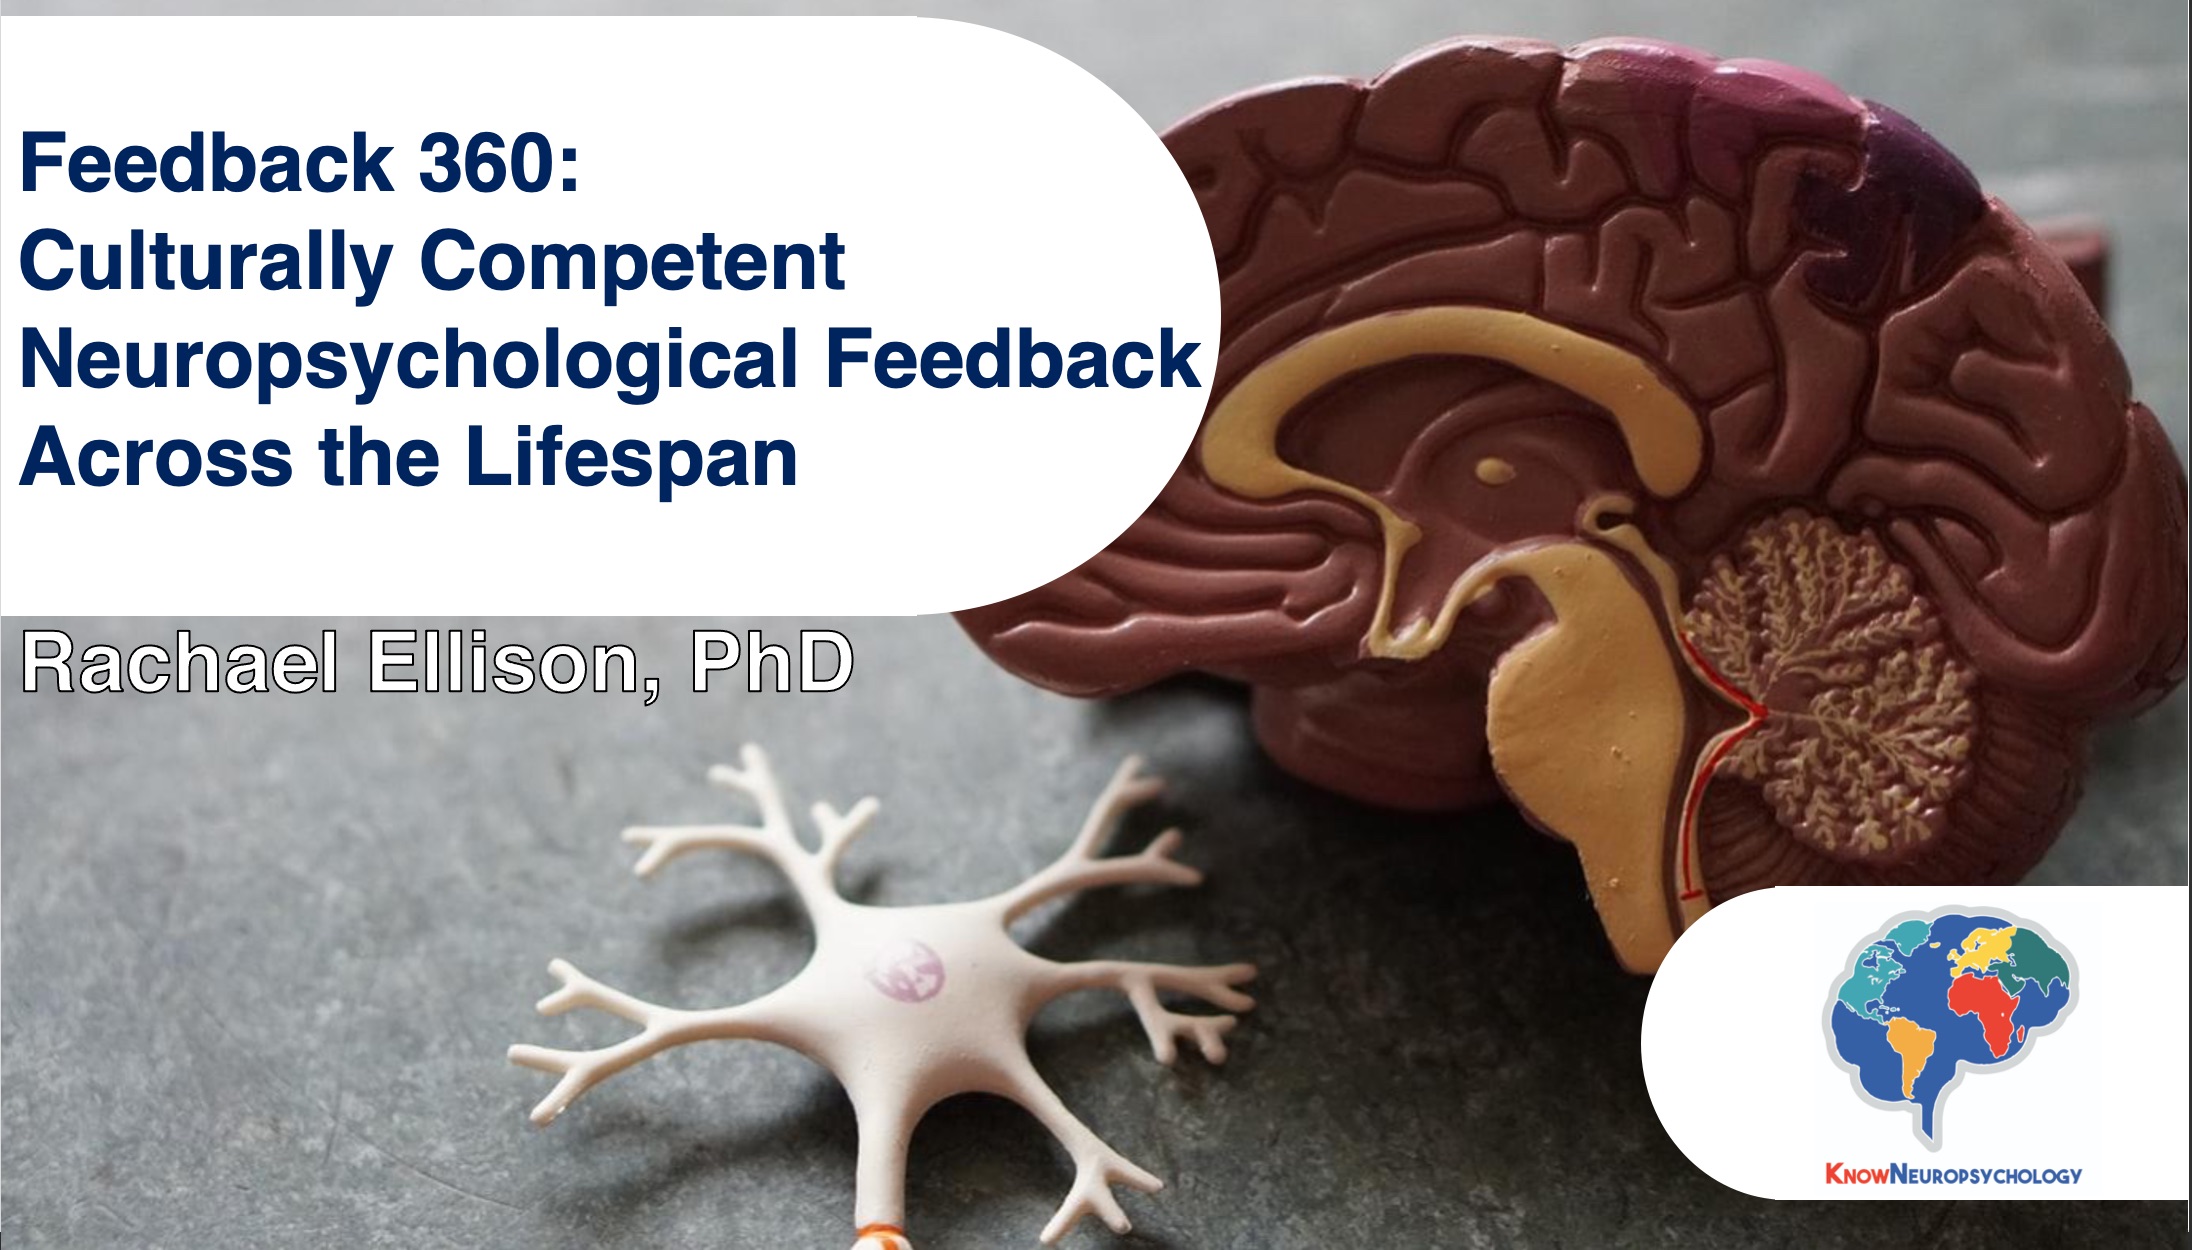 Feedback 360: Culturally Competent Neuropsychological Feedback Across the Lifespan with Dr. Rachael Ellison.